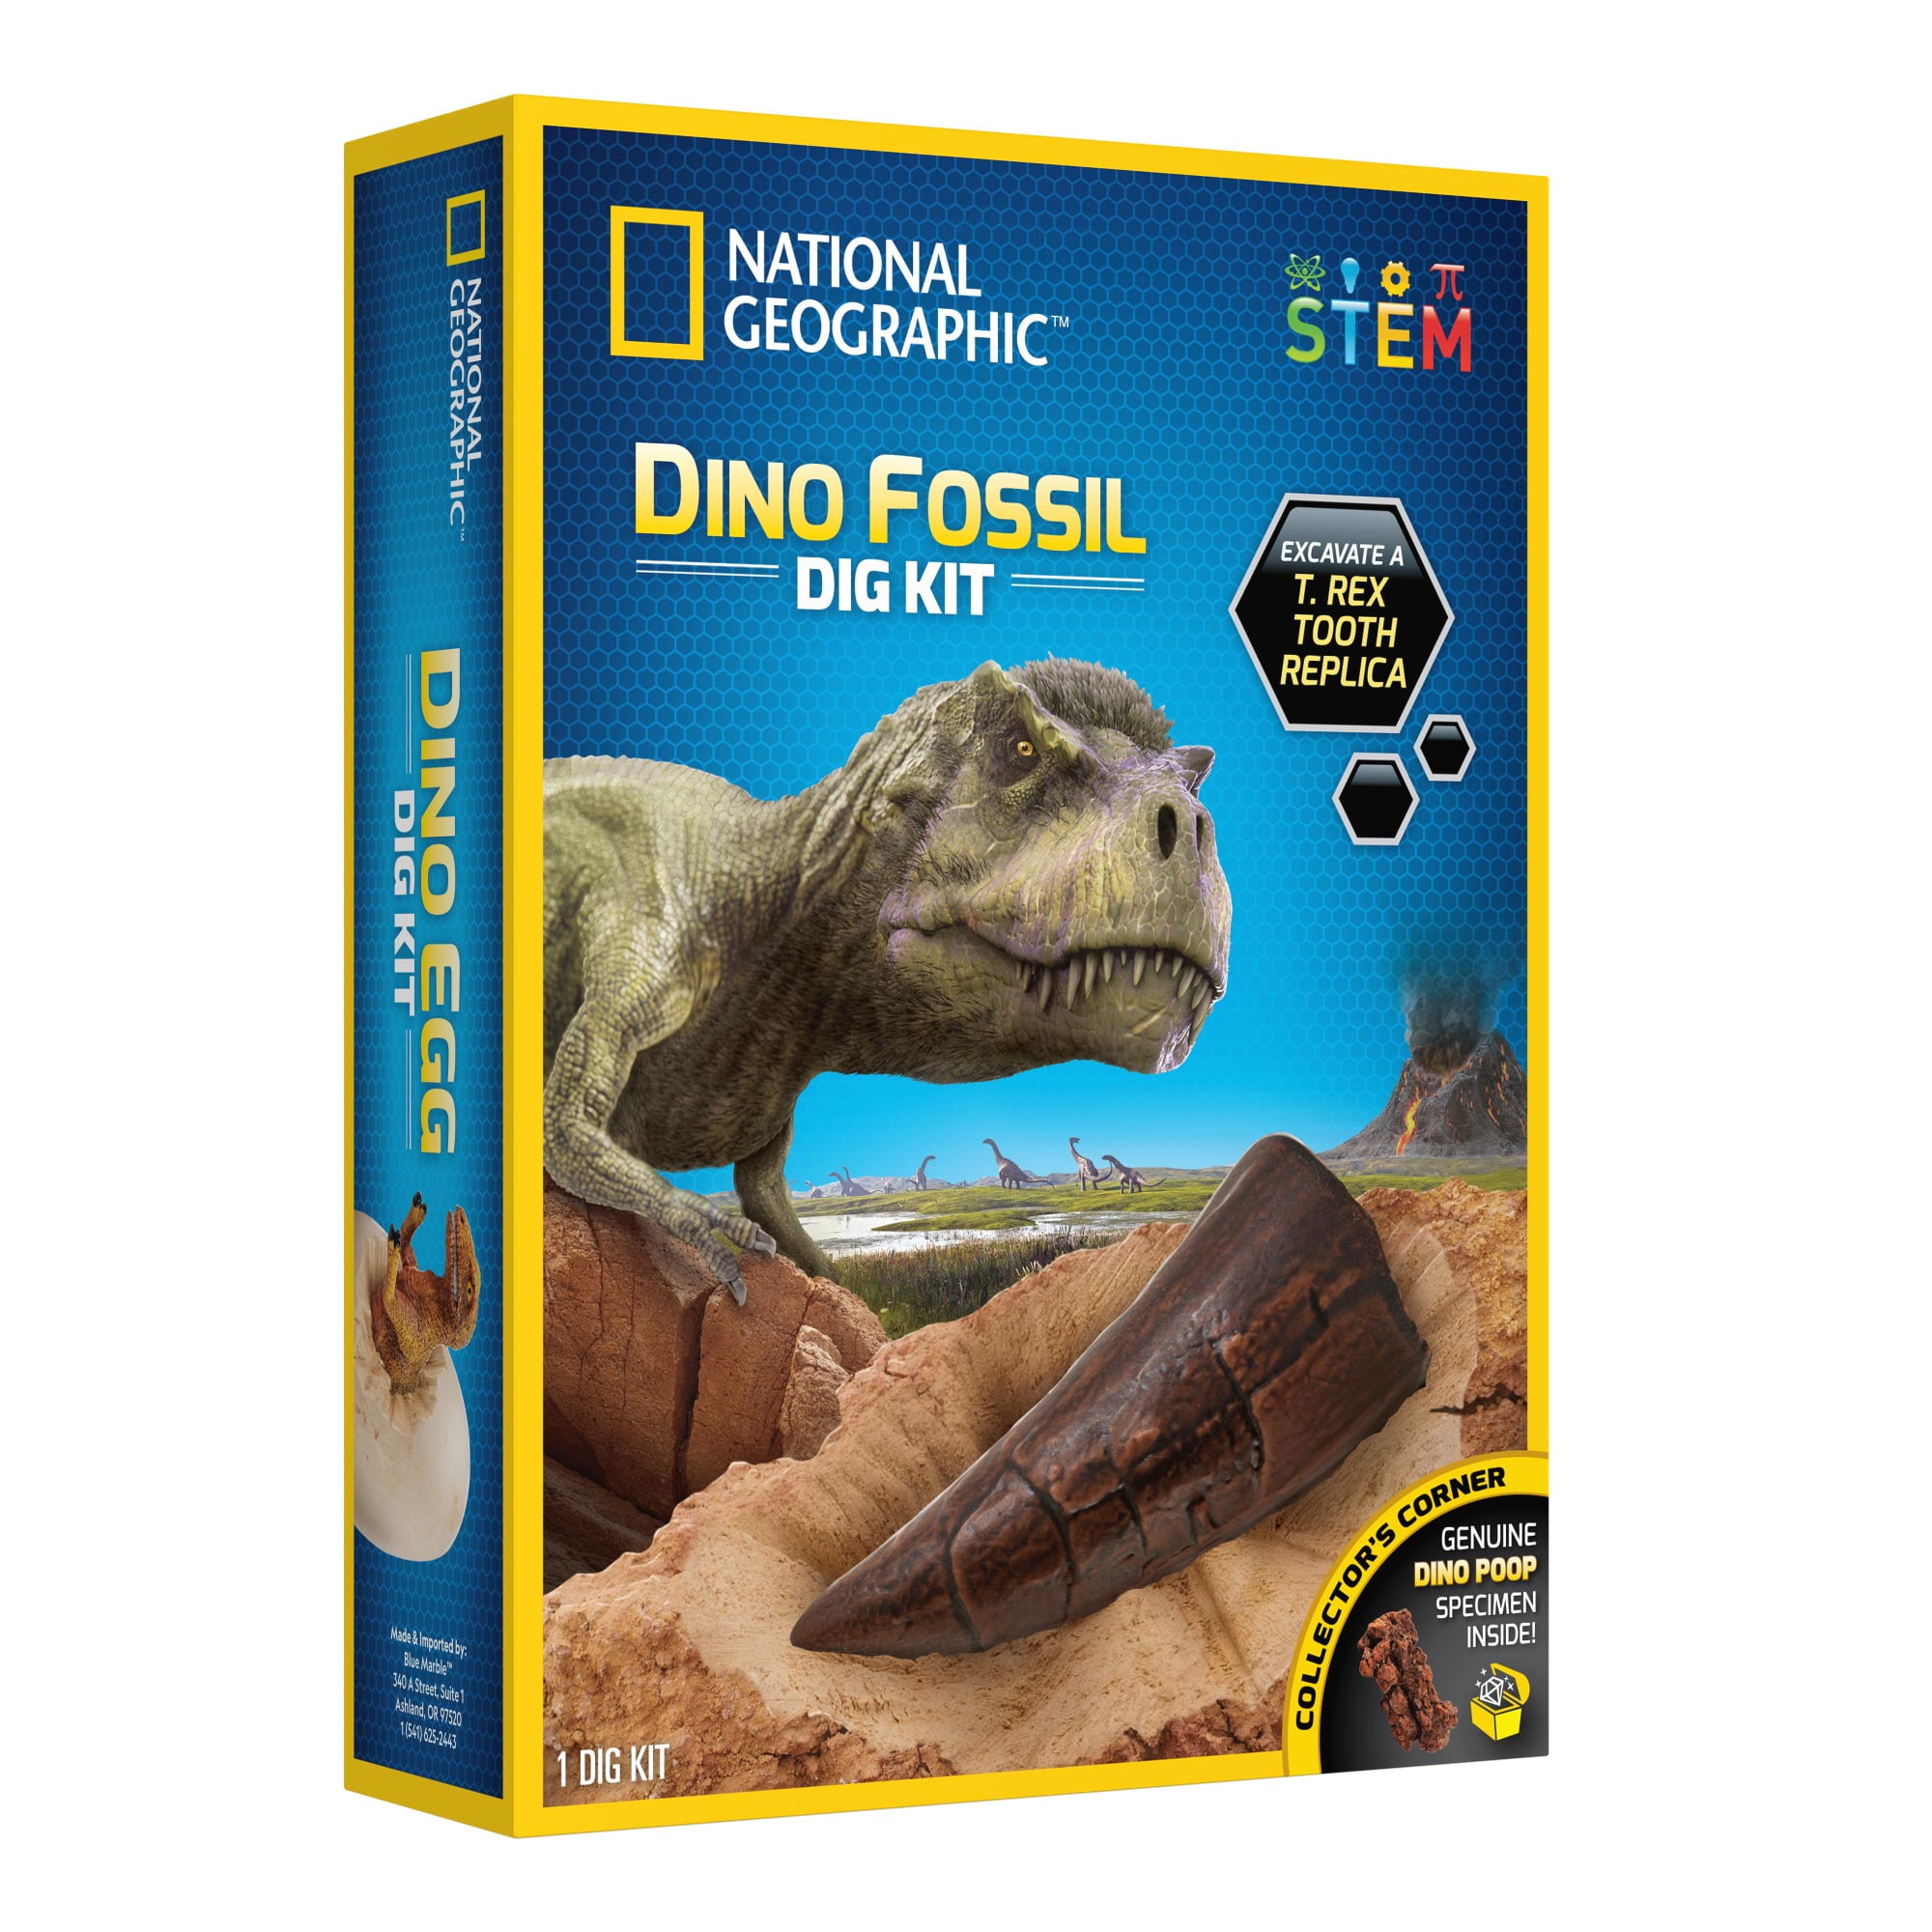 Dinosaur Fossil Dig Excavation Kit Holiday Birthday Gifts for Kids and Children 